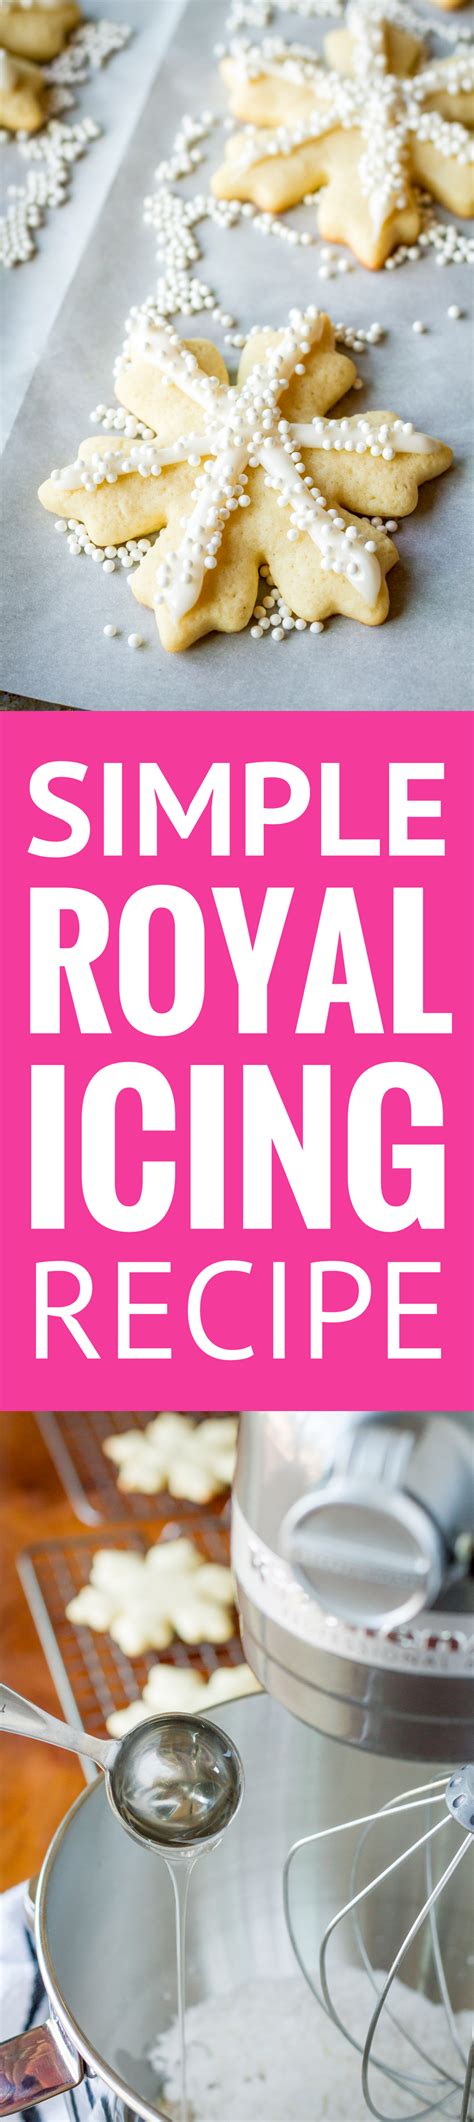 Last updated aug 07, 2021. Simple Royal Icing Recipe -- this royal icing is SO ridiculously easy to make! No egg whites, no ...